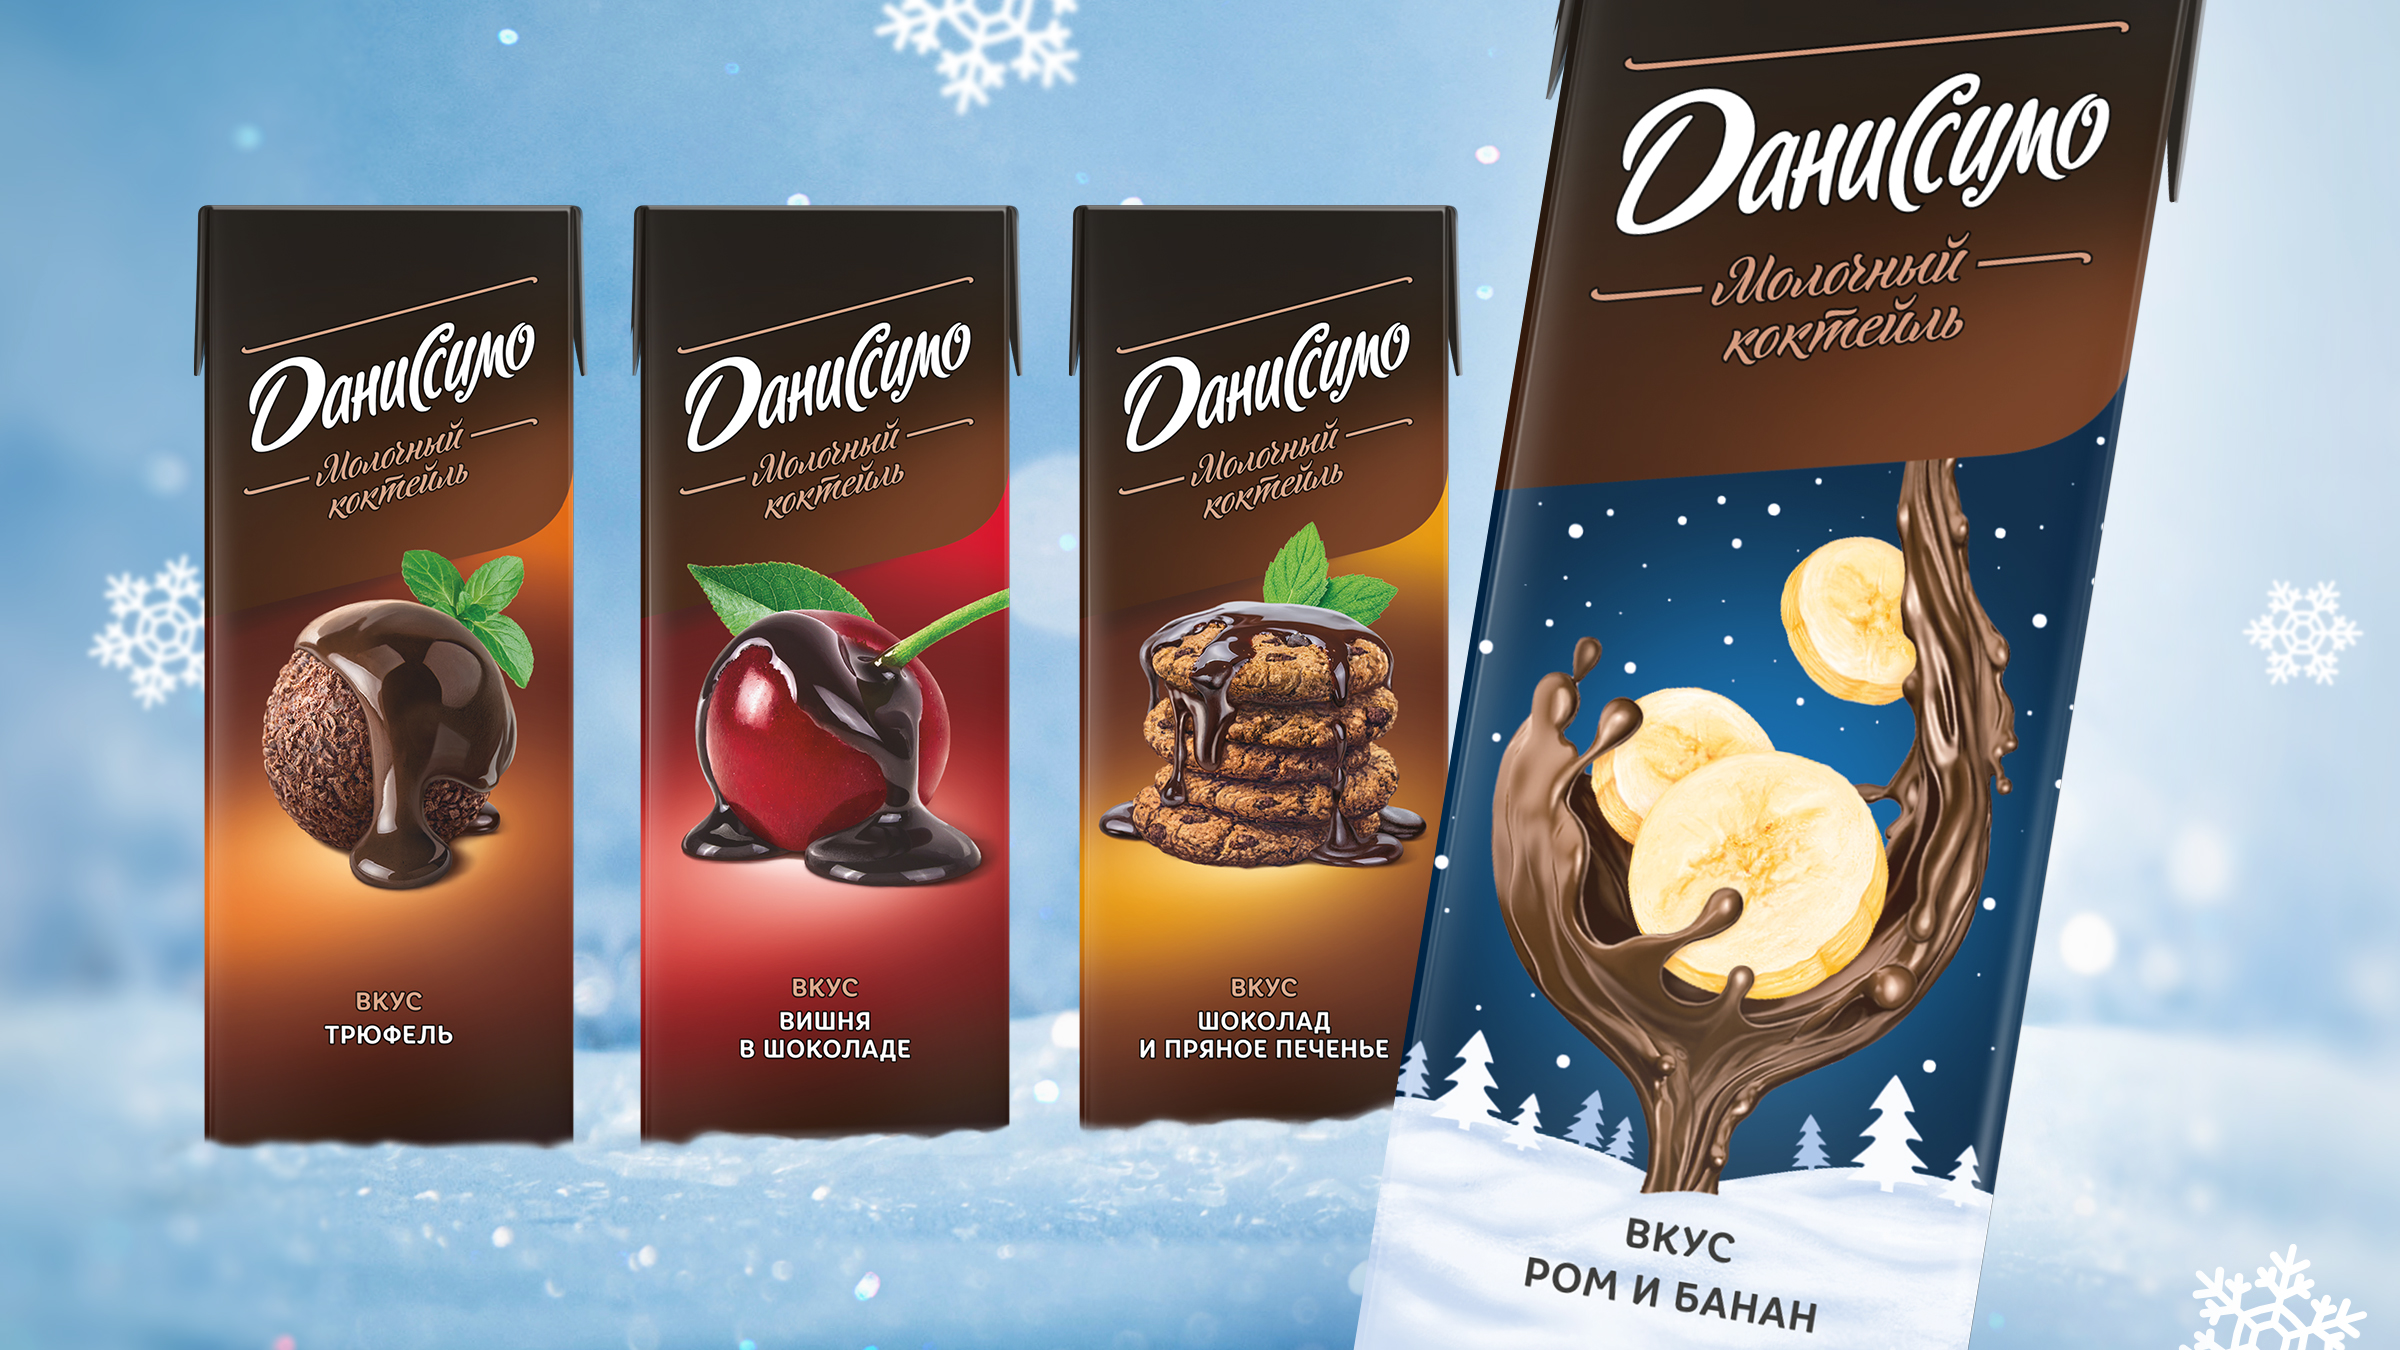 Rum Flavored Soft Drink, Danissimo Milkshakes Line has Expanded with a New Seasonal Flavor